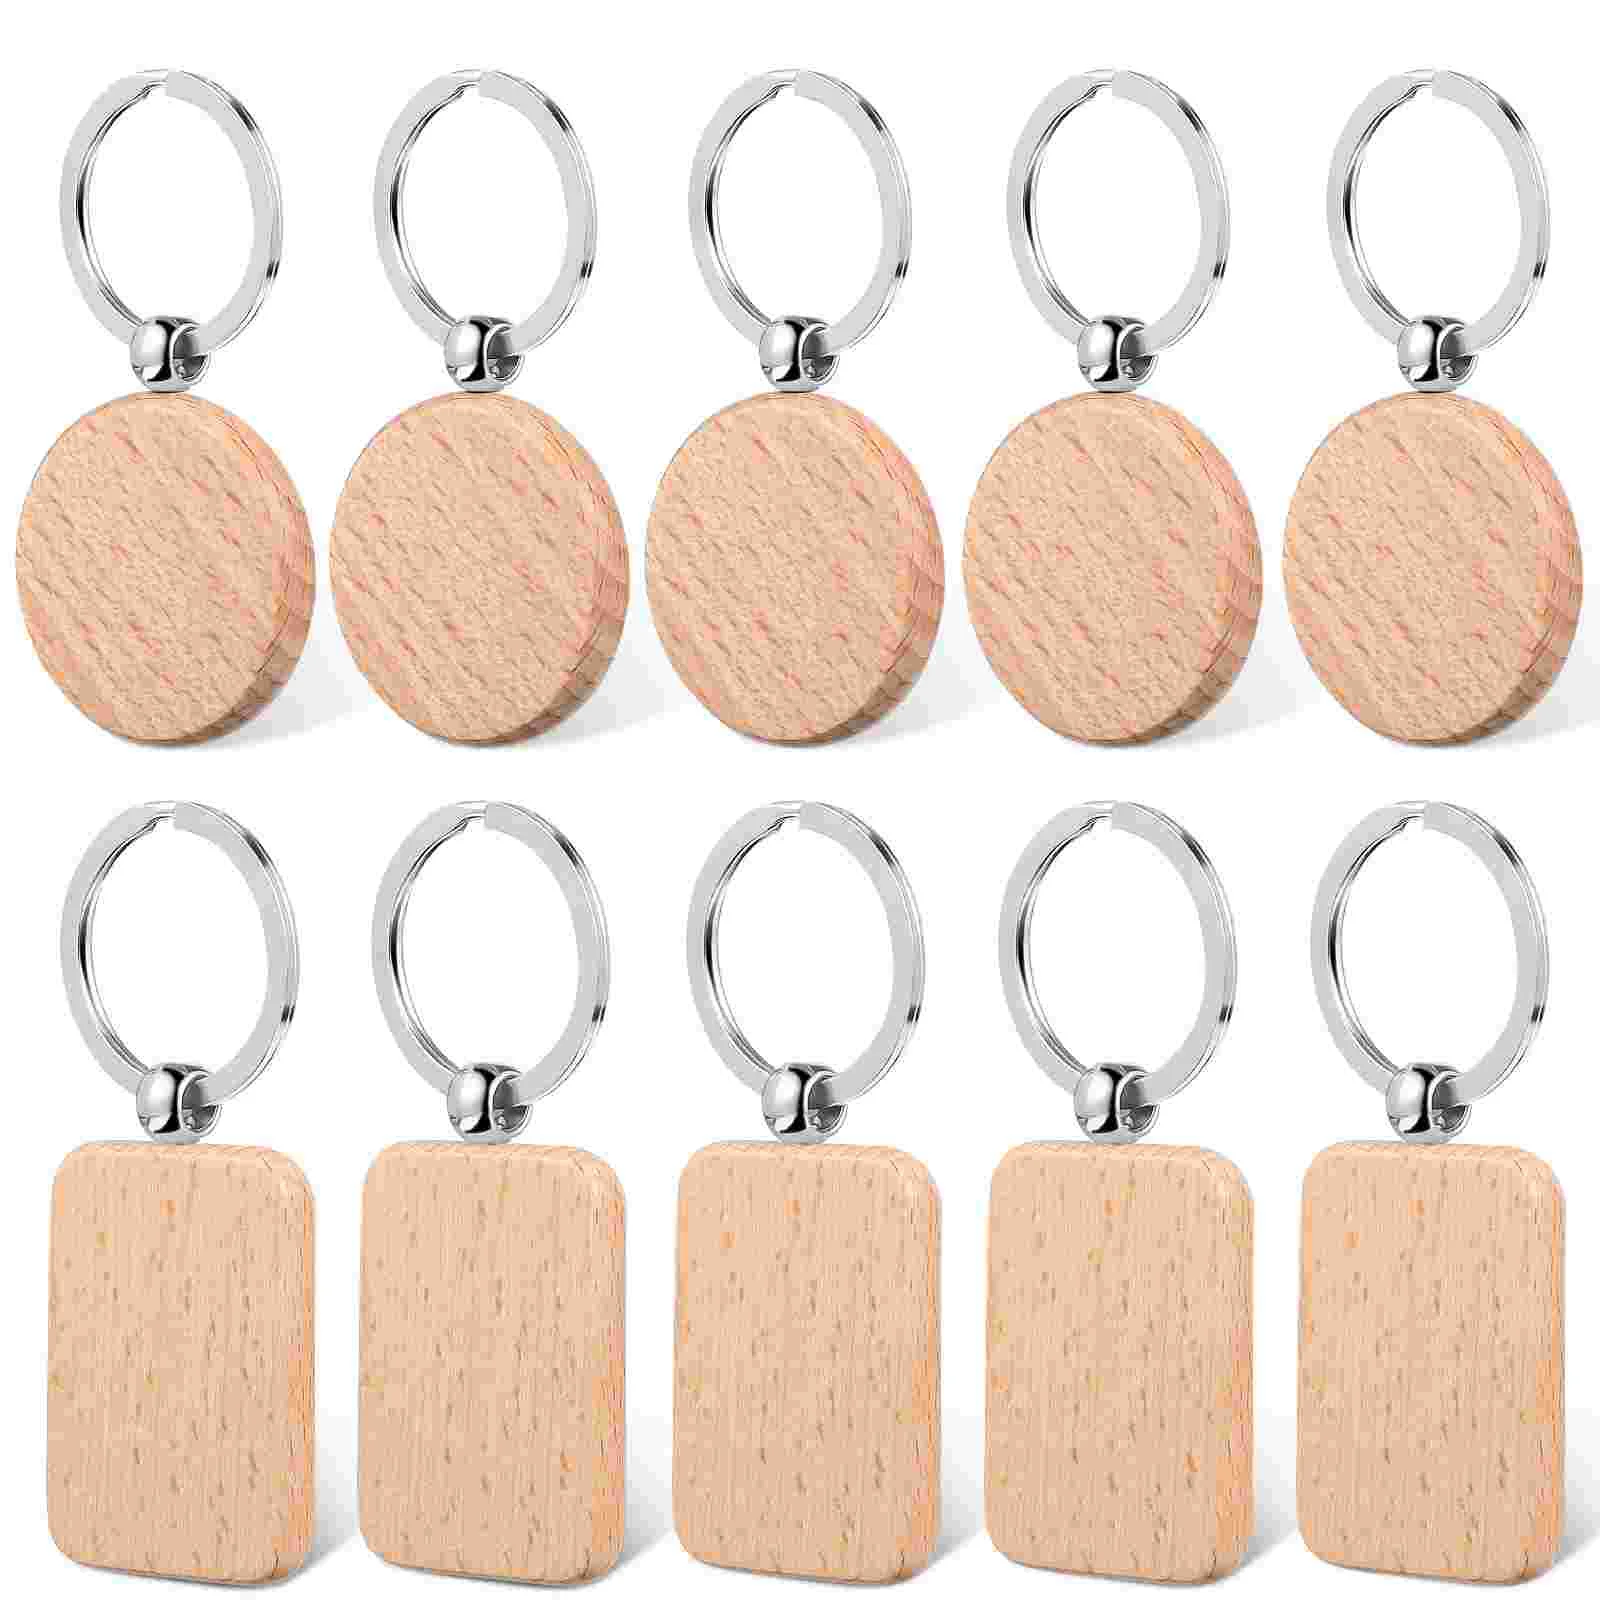 

Key Wood Wooden Blanks Engraving Blank Tags Chain Unfinished Ring Sign Tag Slices Chains Rings Natural Crafts Circles Labels